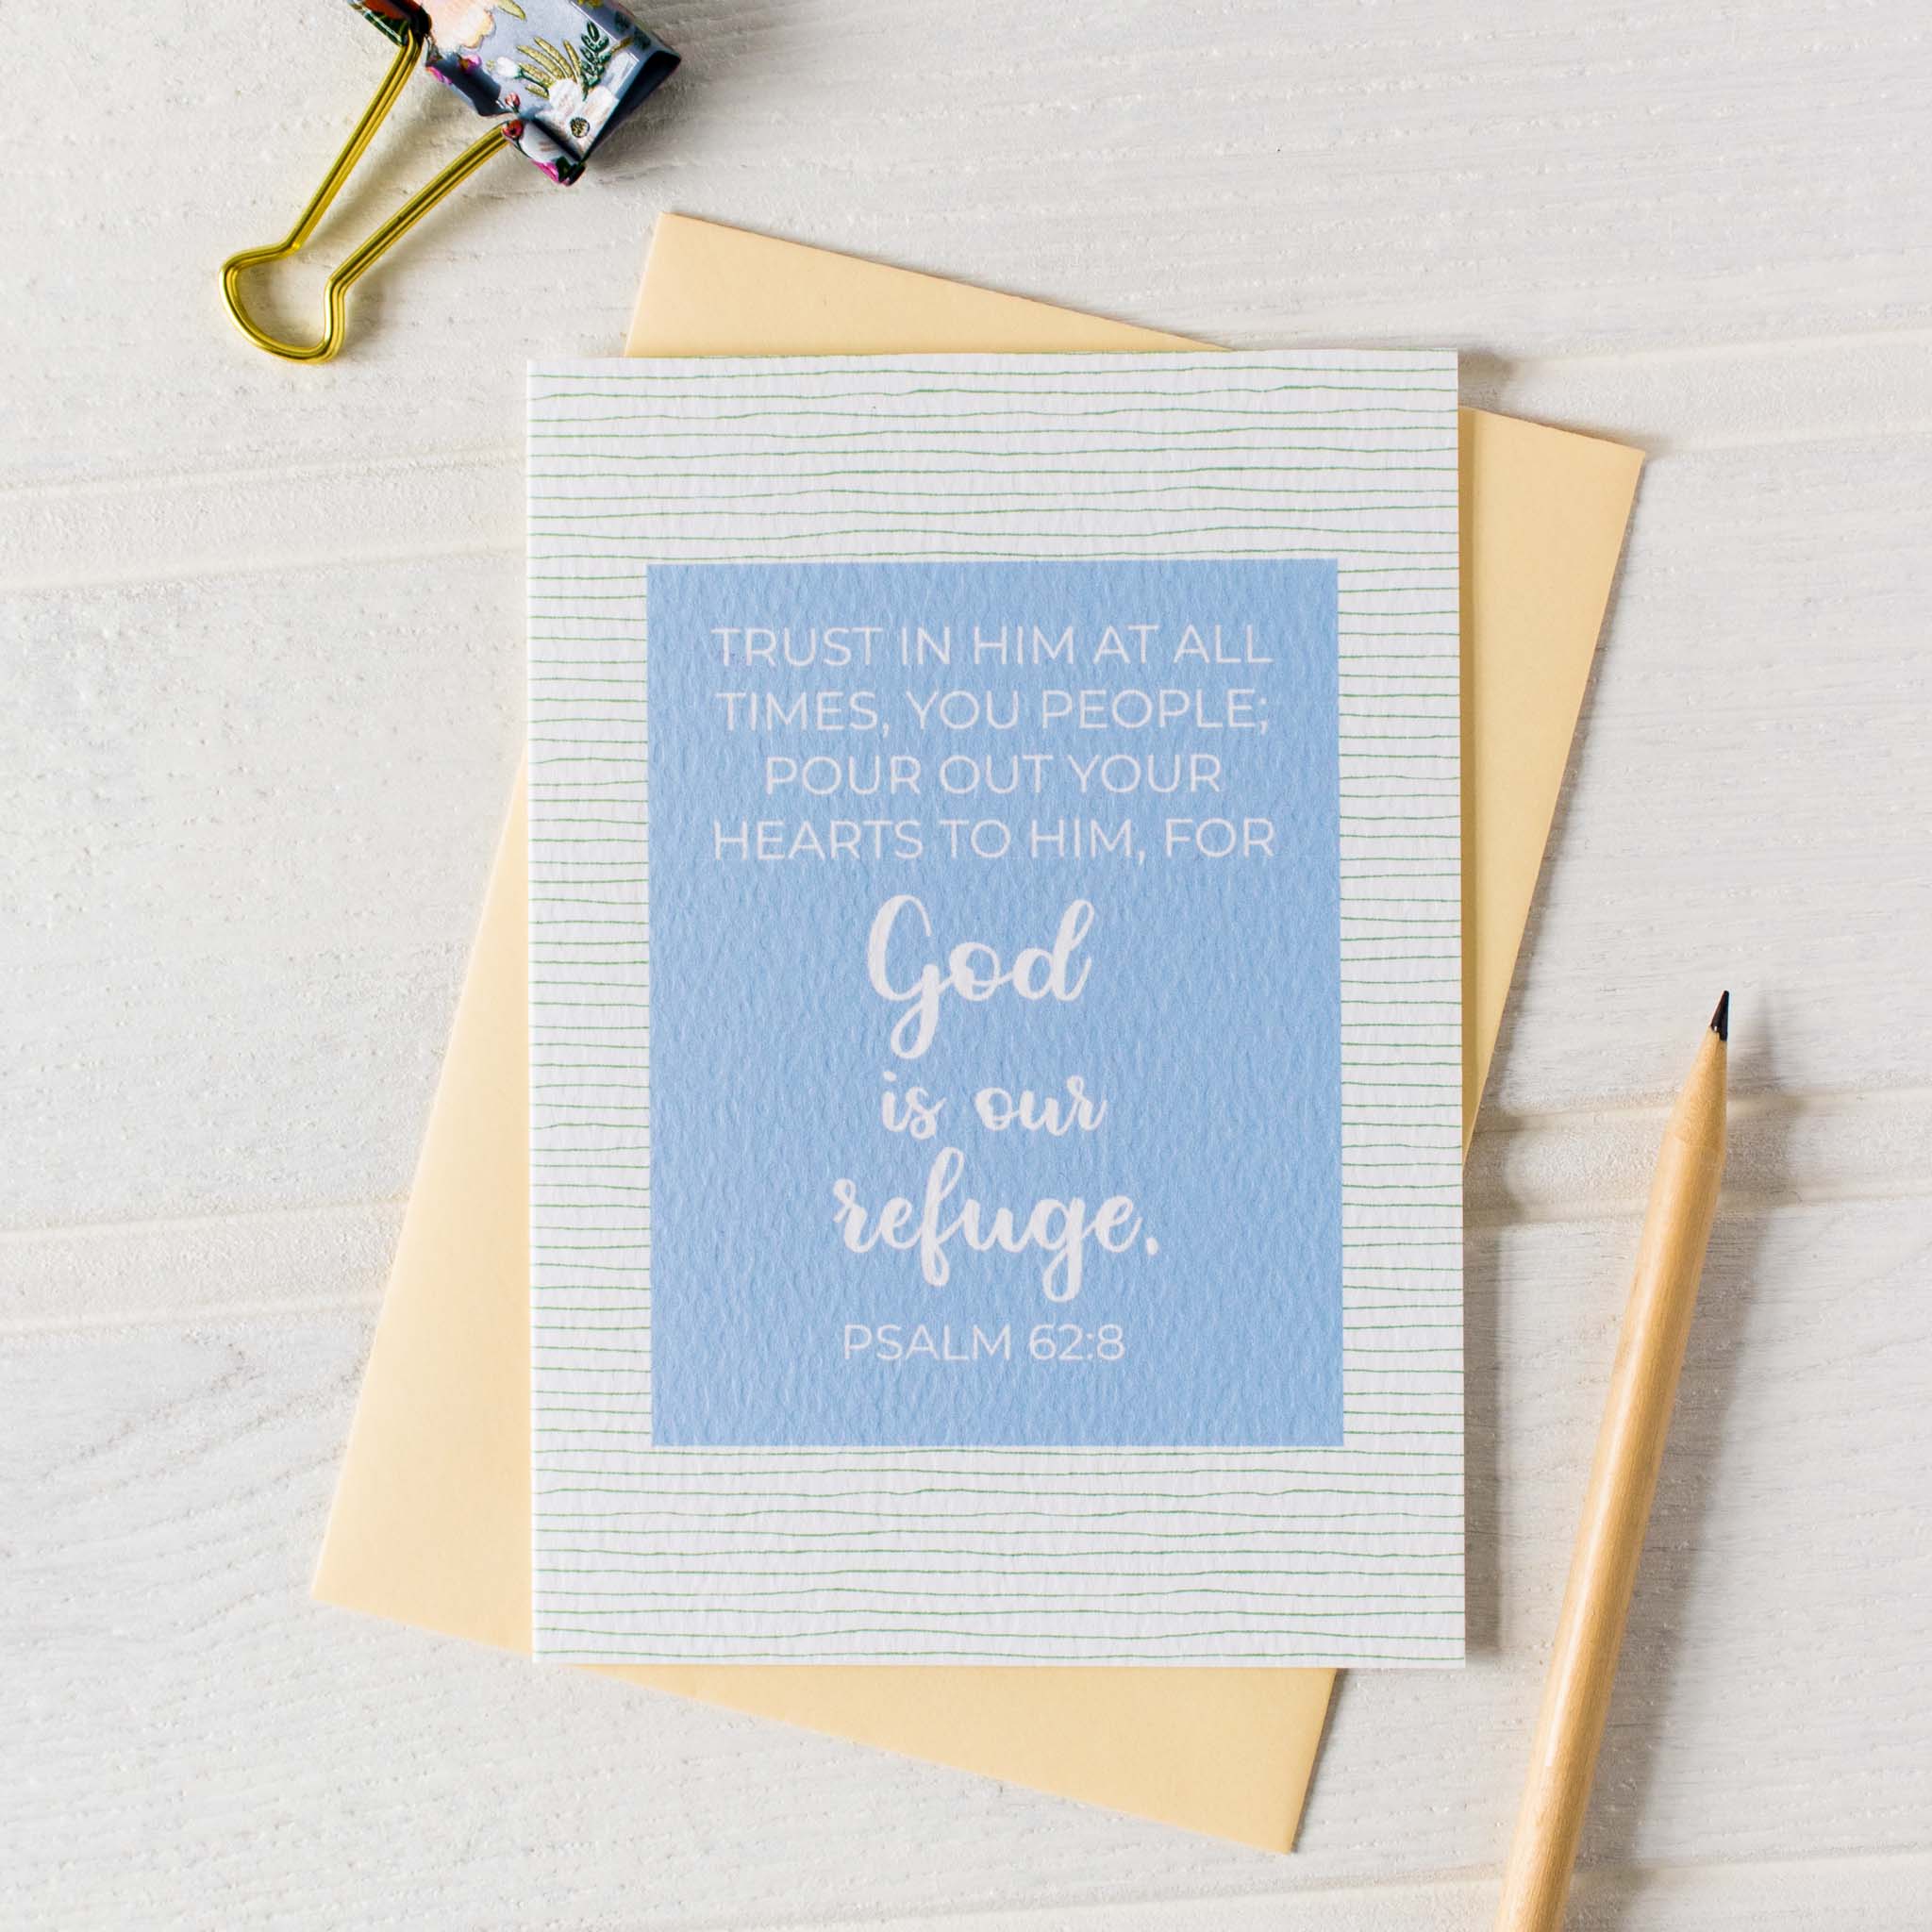 Pour Out Your Hearts To Him Card - Psalm 62:8 with envelope